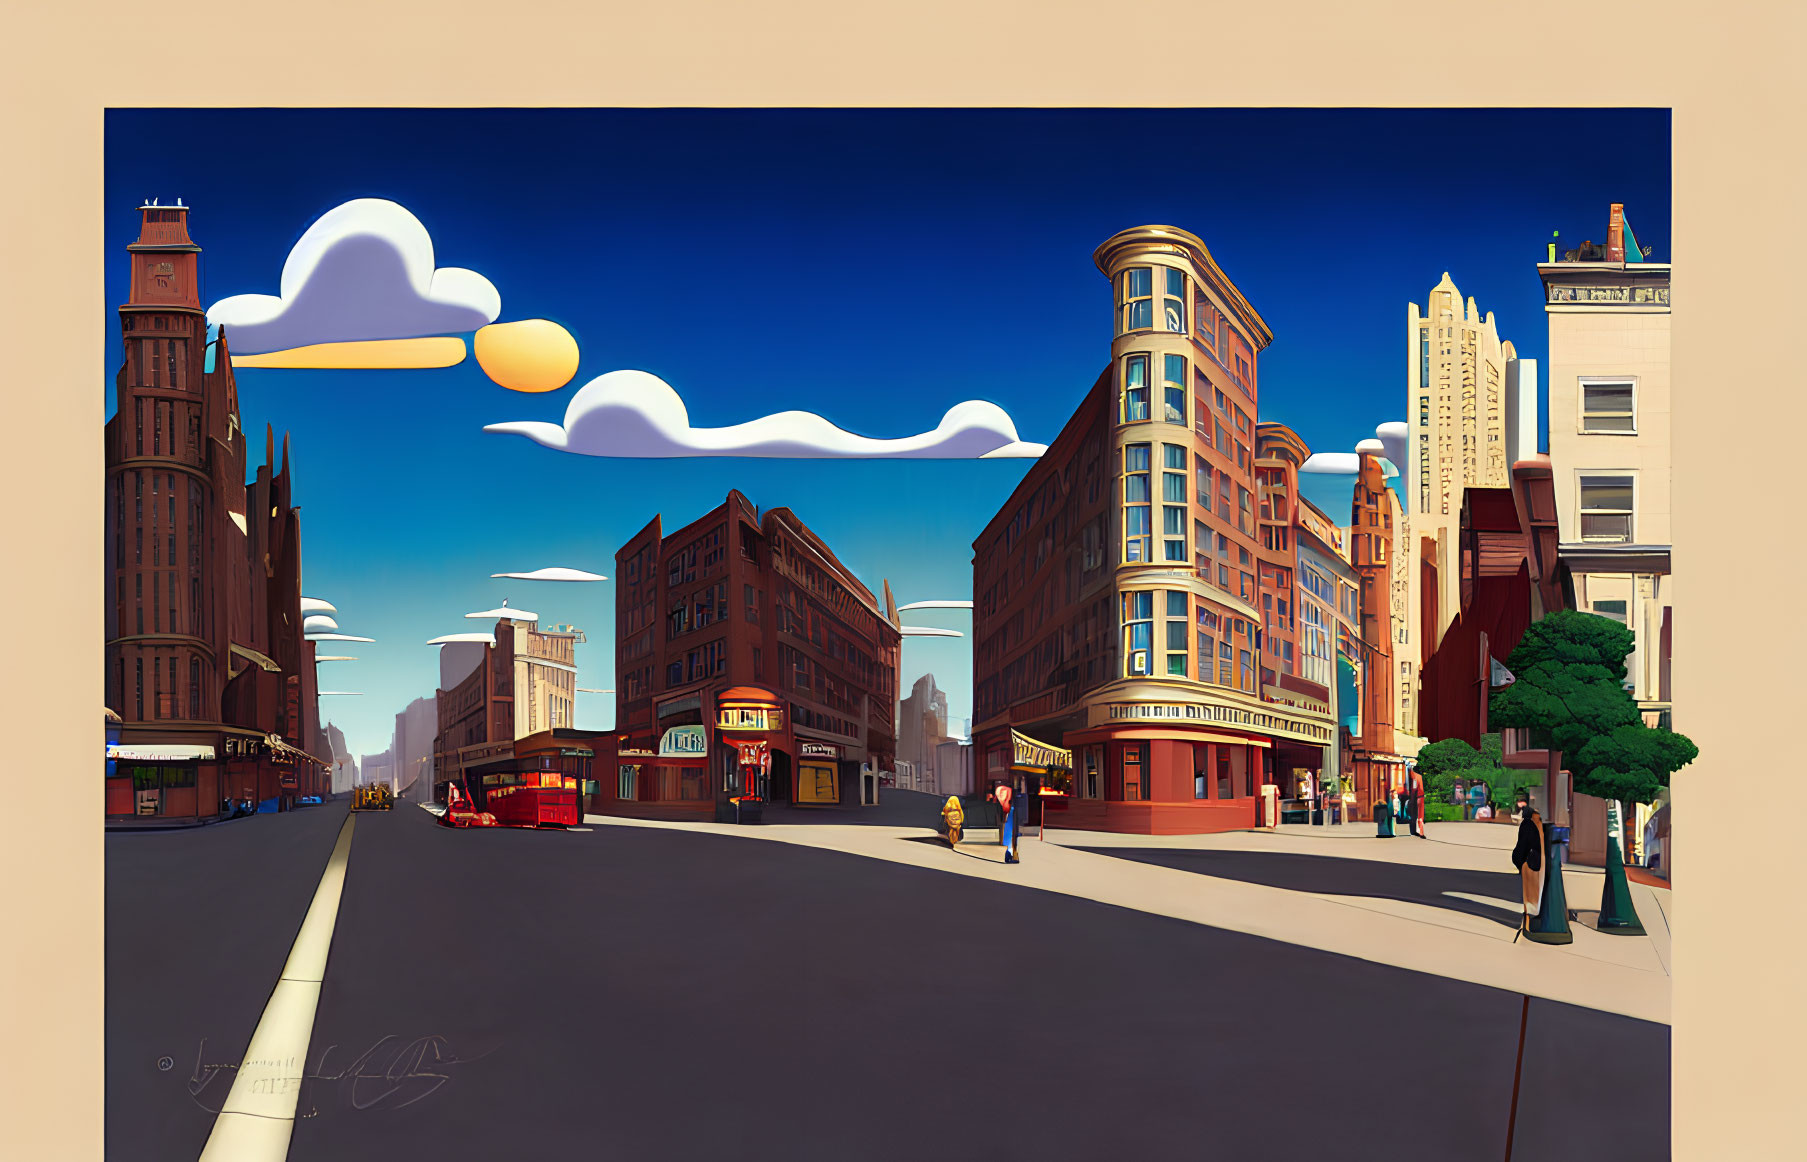 Colorful art deco urban street corner illustration with whimsical clouds